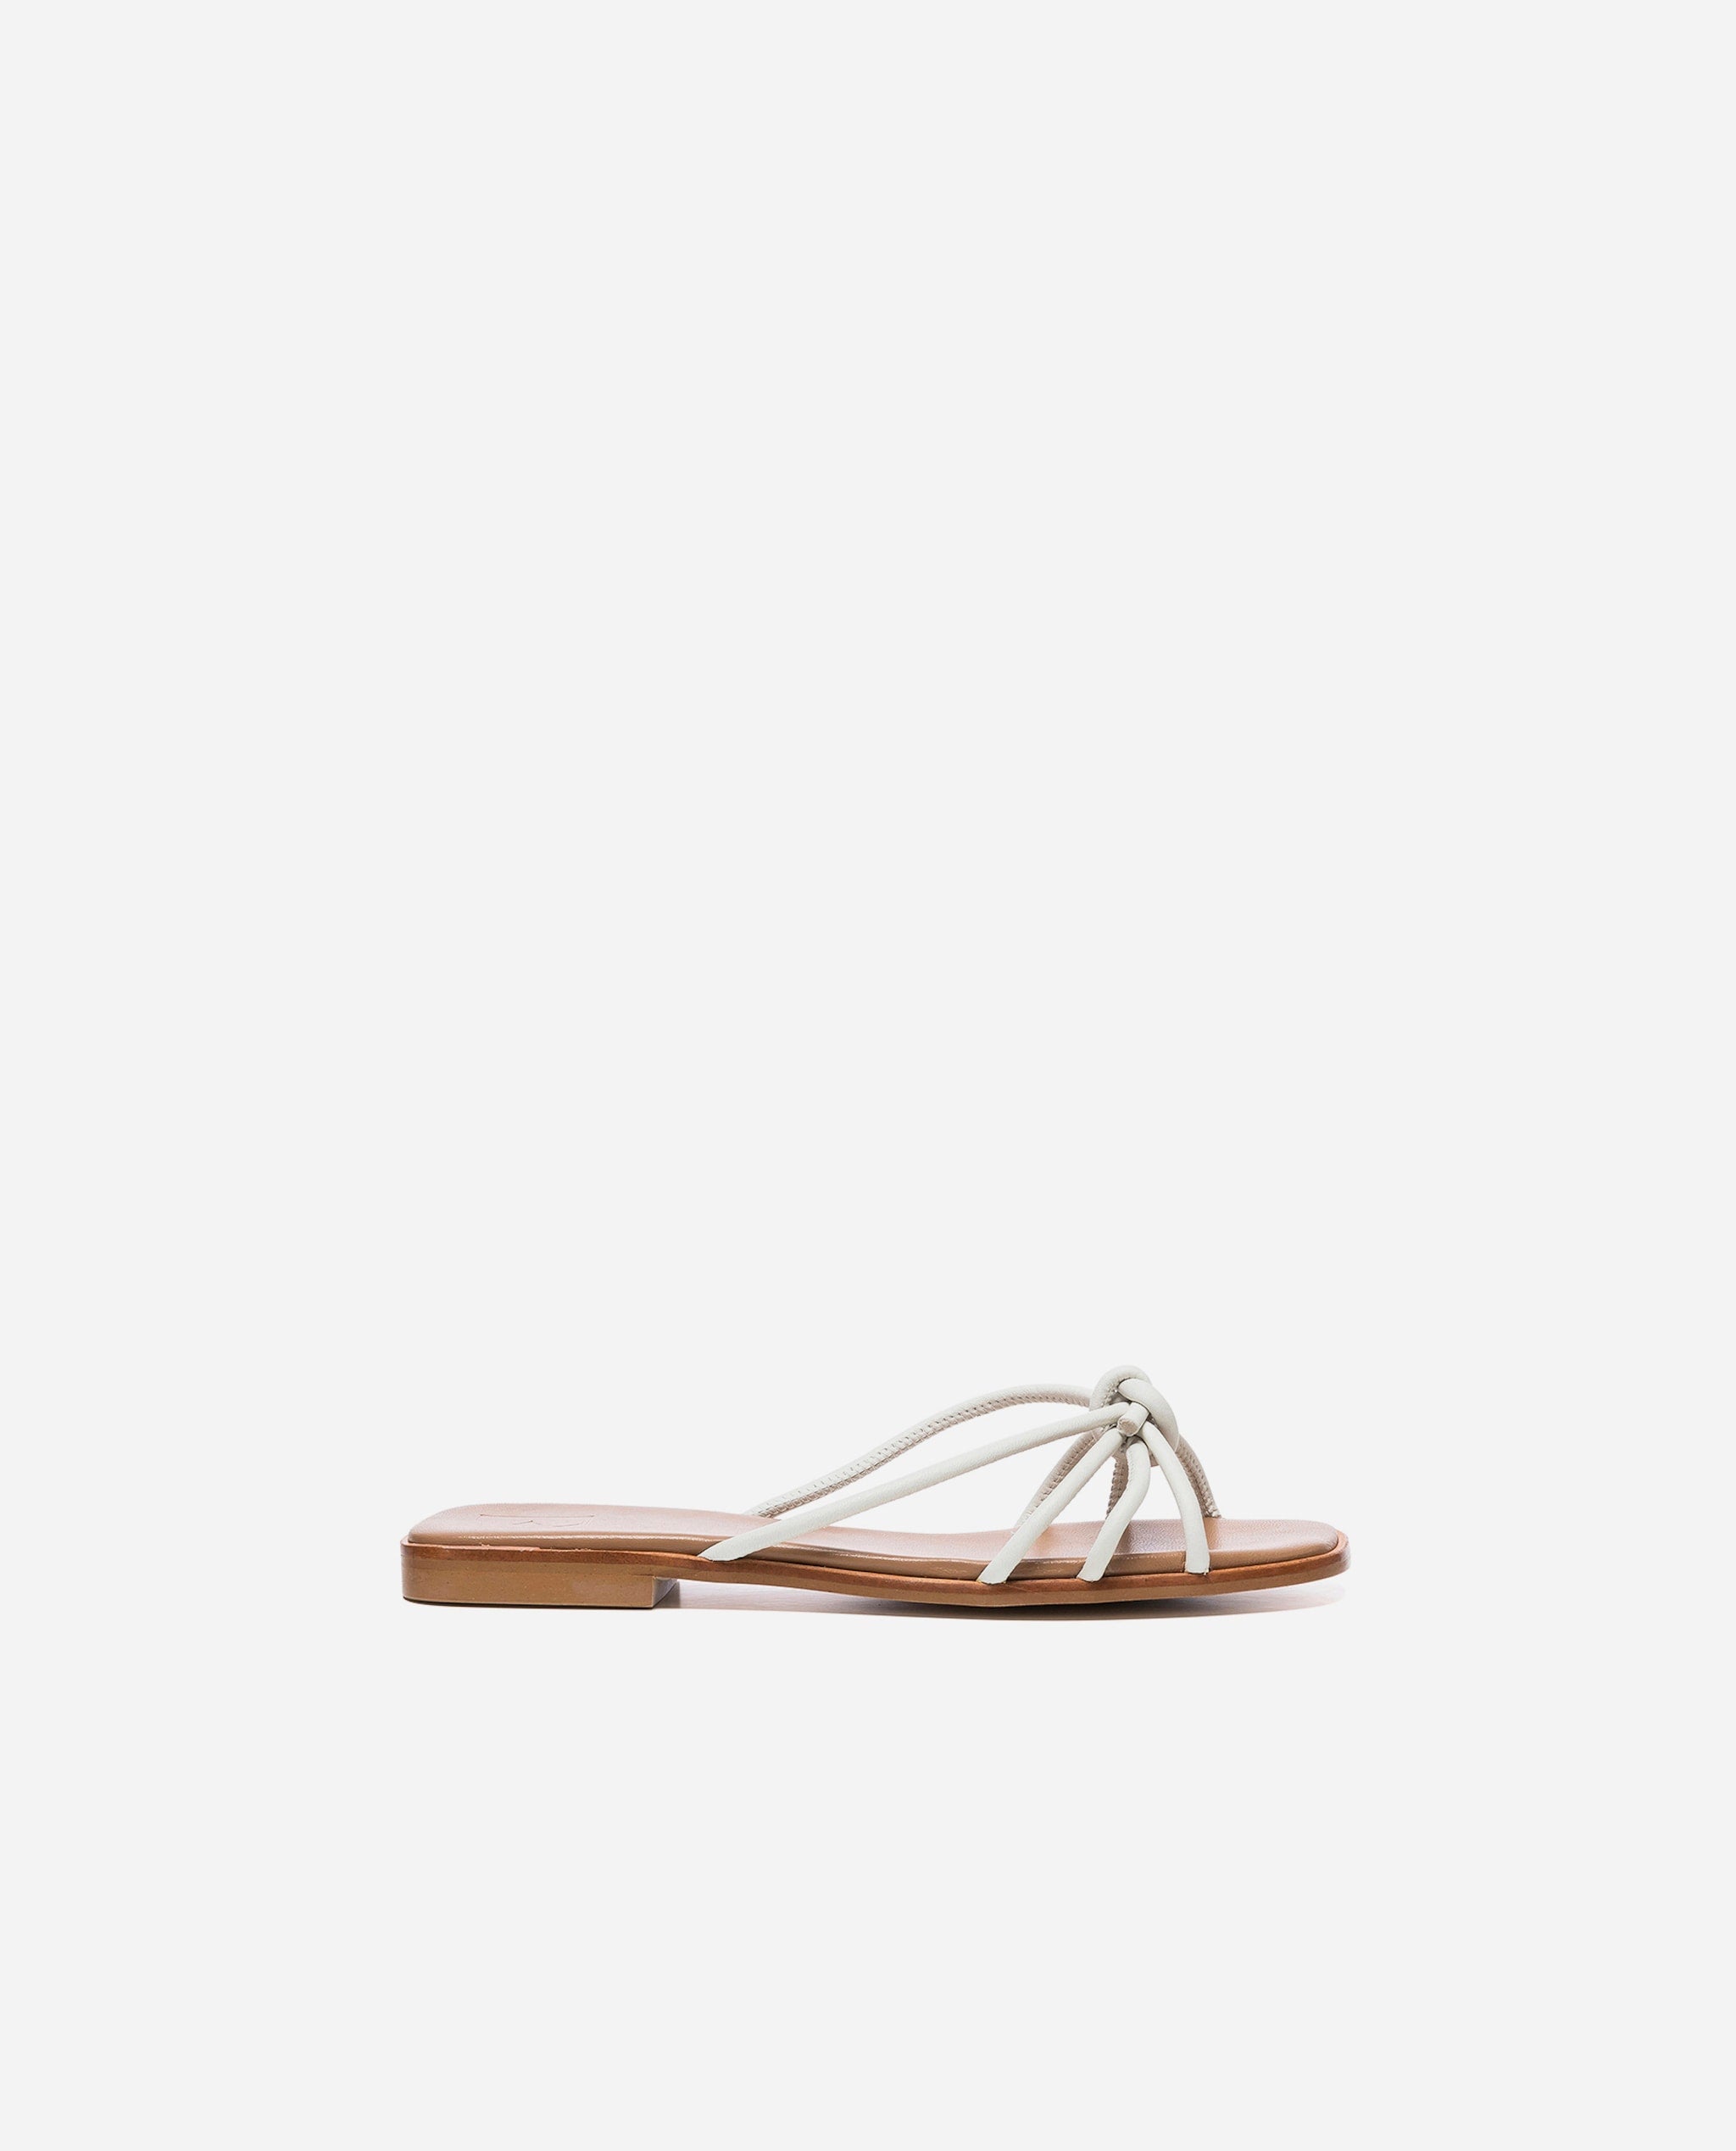 Yvette Leather Off White Flat Sandals Flats 19010700801-008 - 7